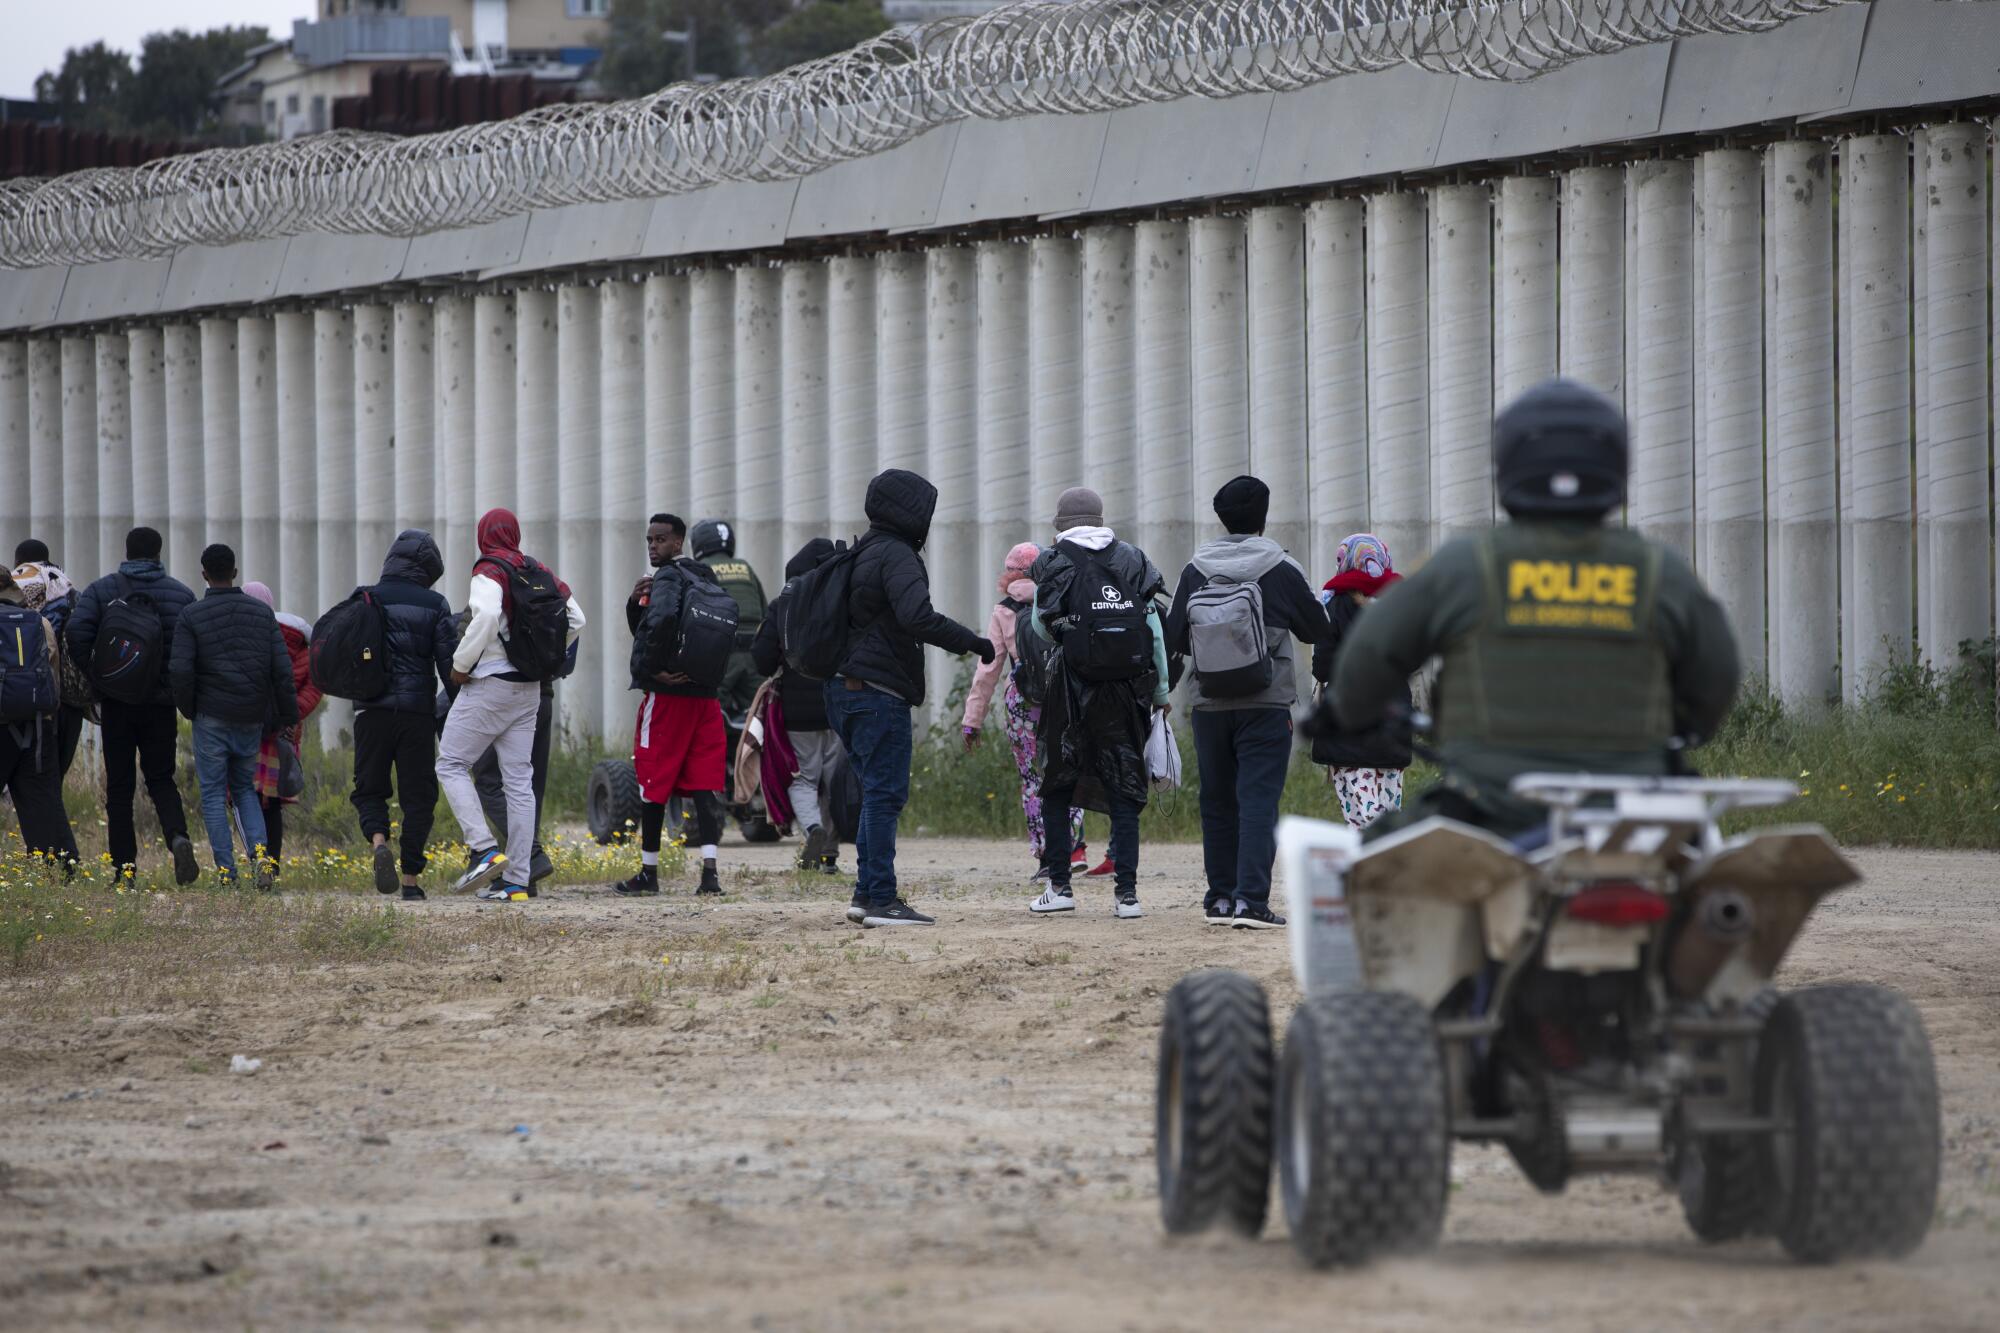 A Border Patrol agent on an ATV chases a group of migrants.